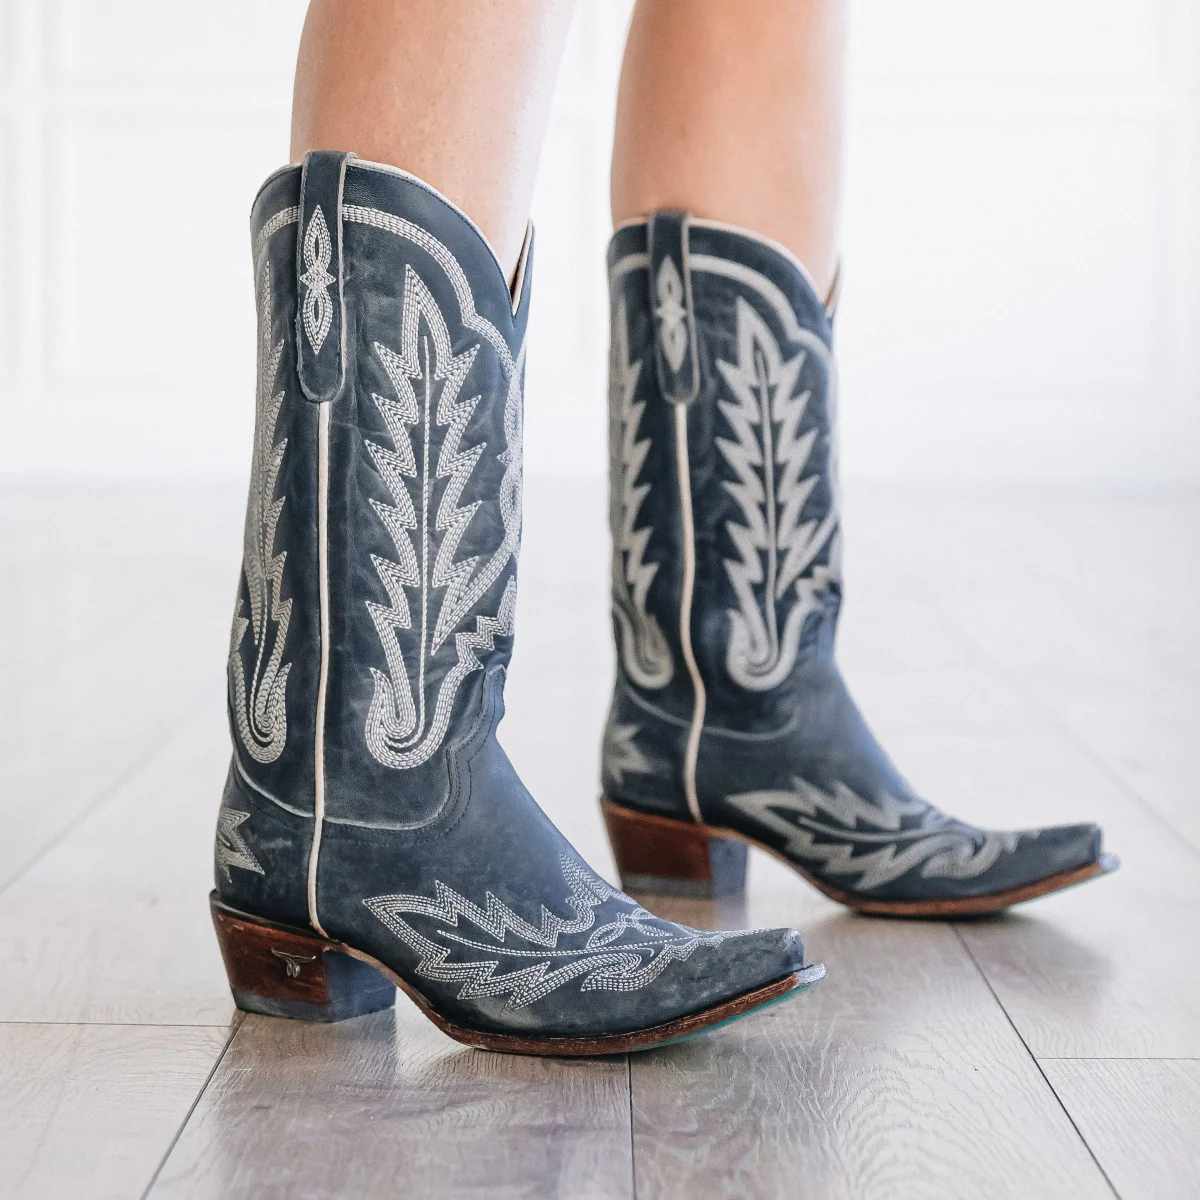 Cowboy & Western Boots - Gray - women - 127 products